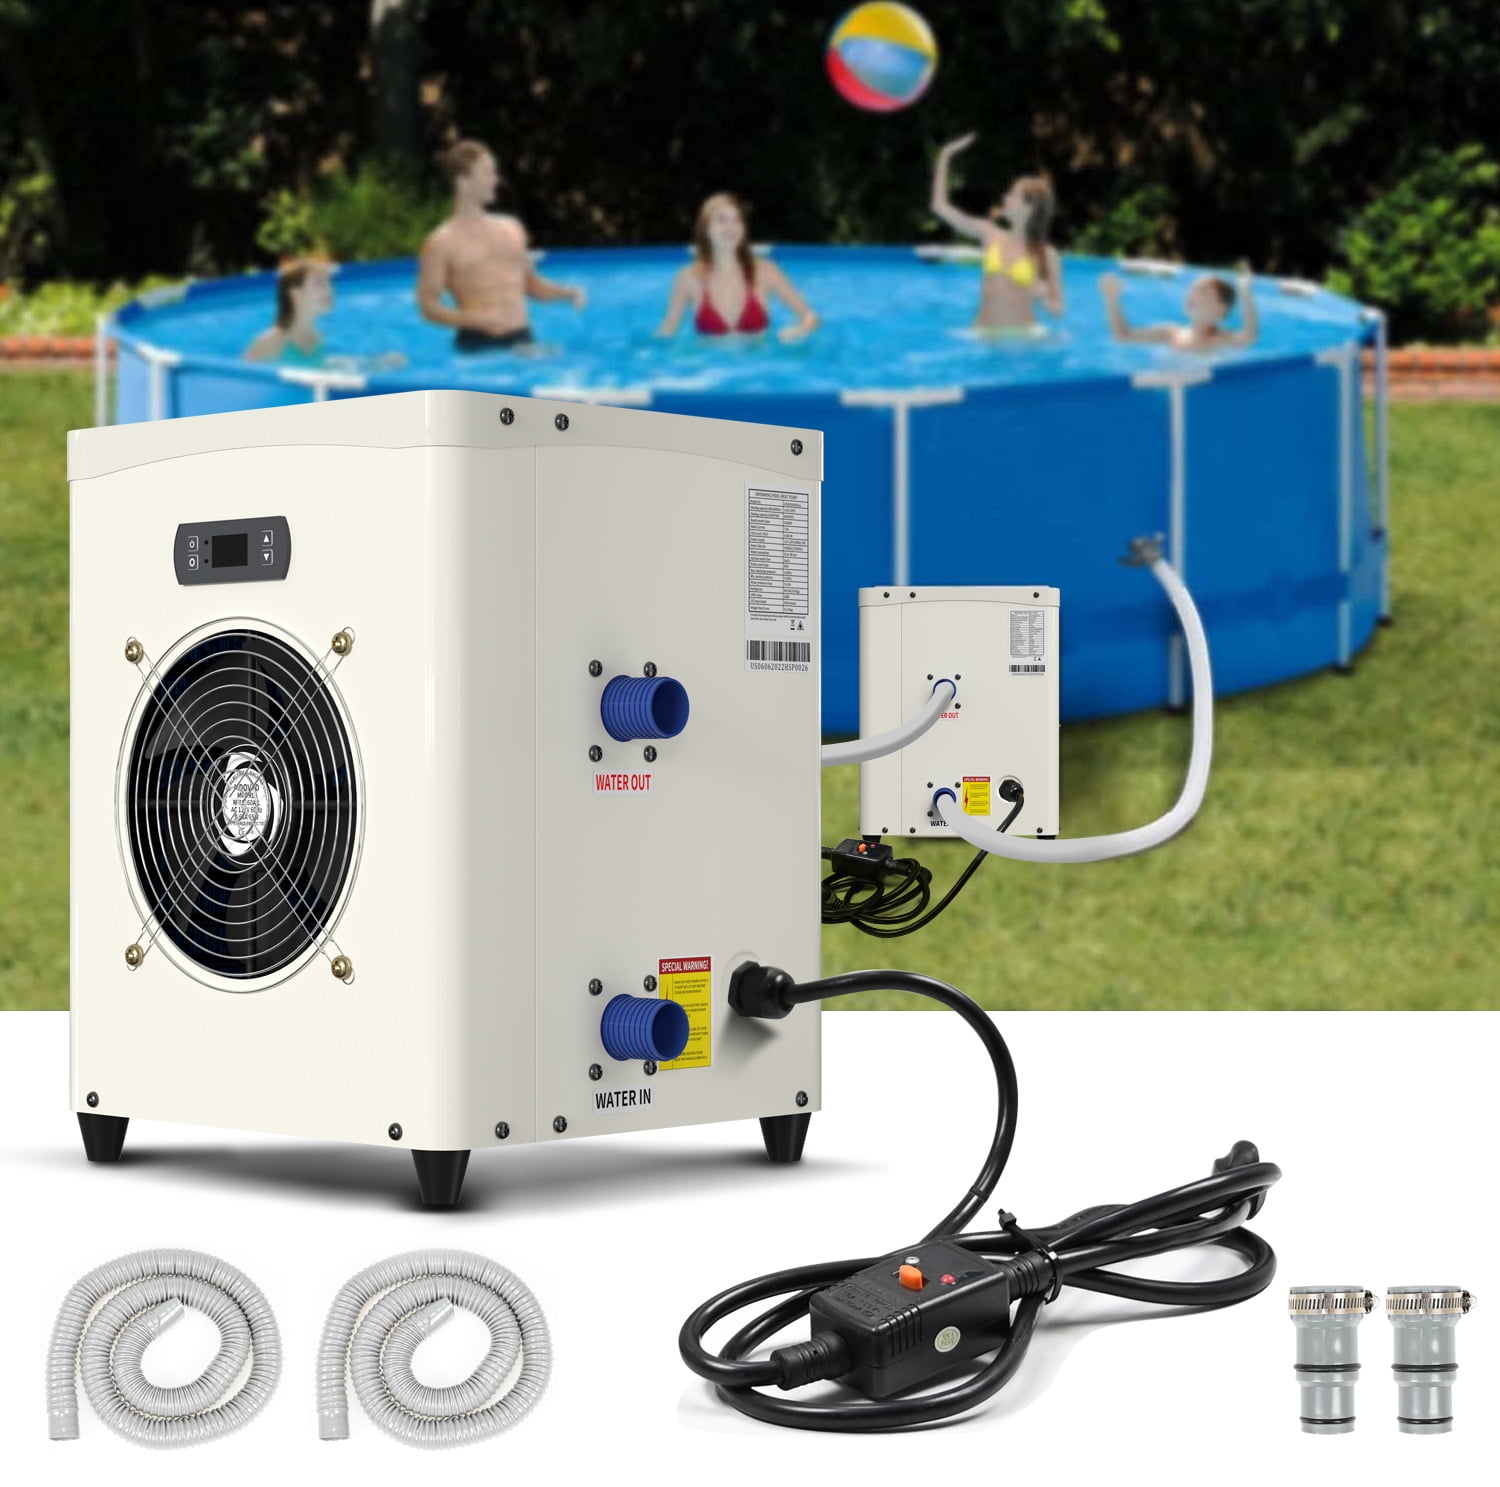 forråde Lappe Forstærke Slsy 14331 BTU Mini Swimming Pool Heat Pump for Above-Ground Pools,  Electric Pool Heater with Titanium Heat Exchanger, 110V 60Hz - Walmart.com